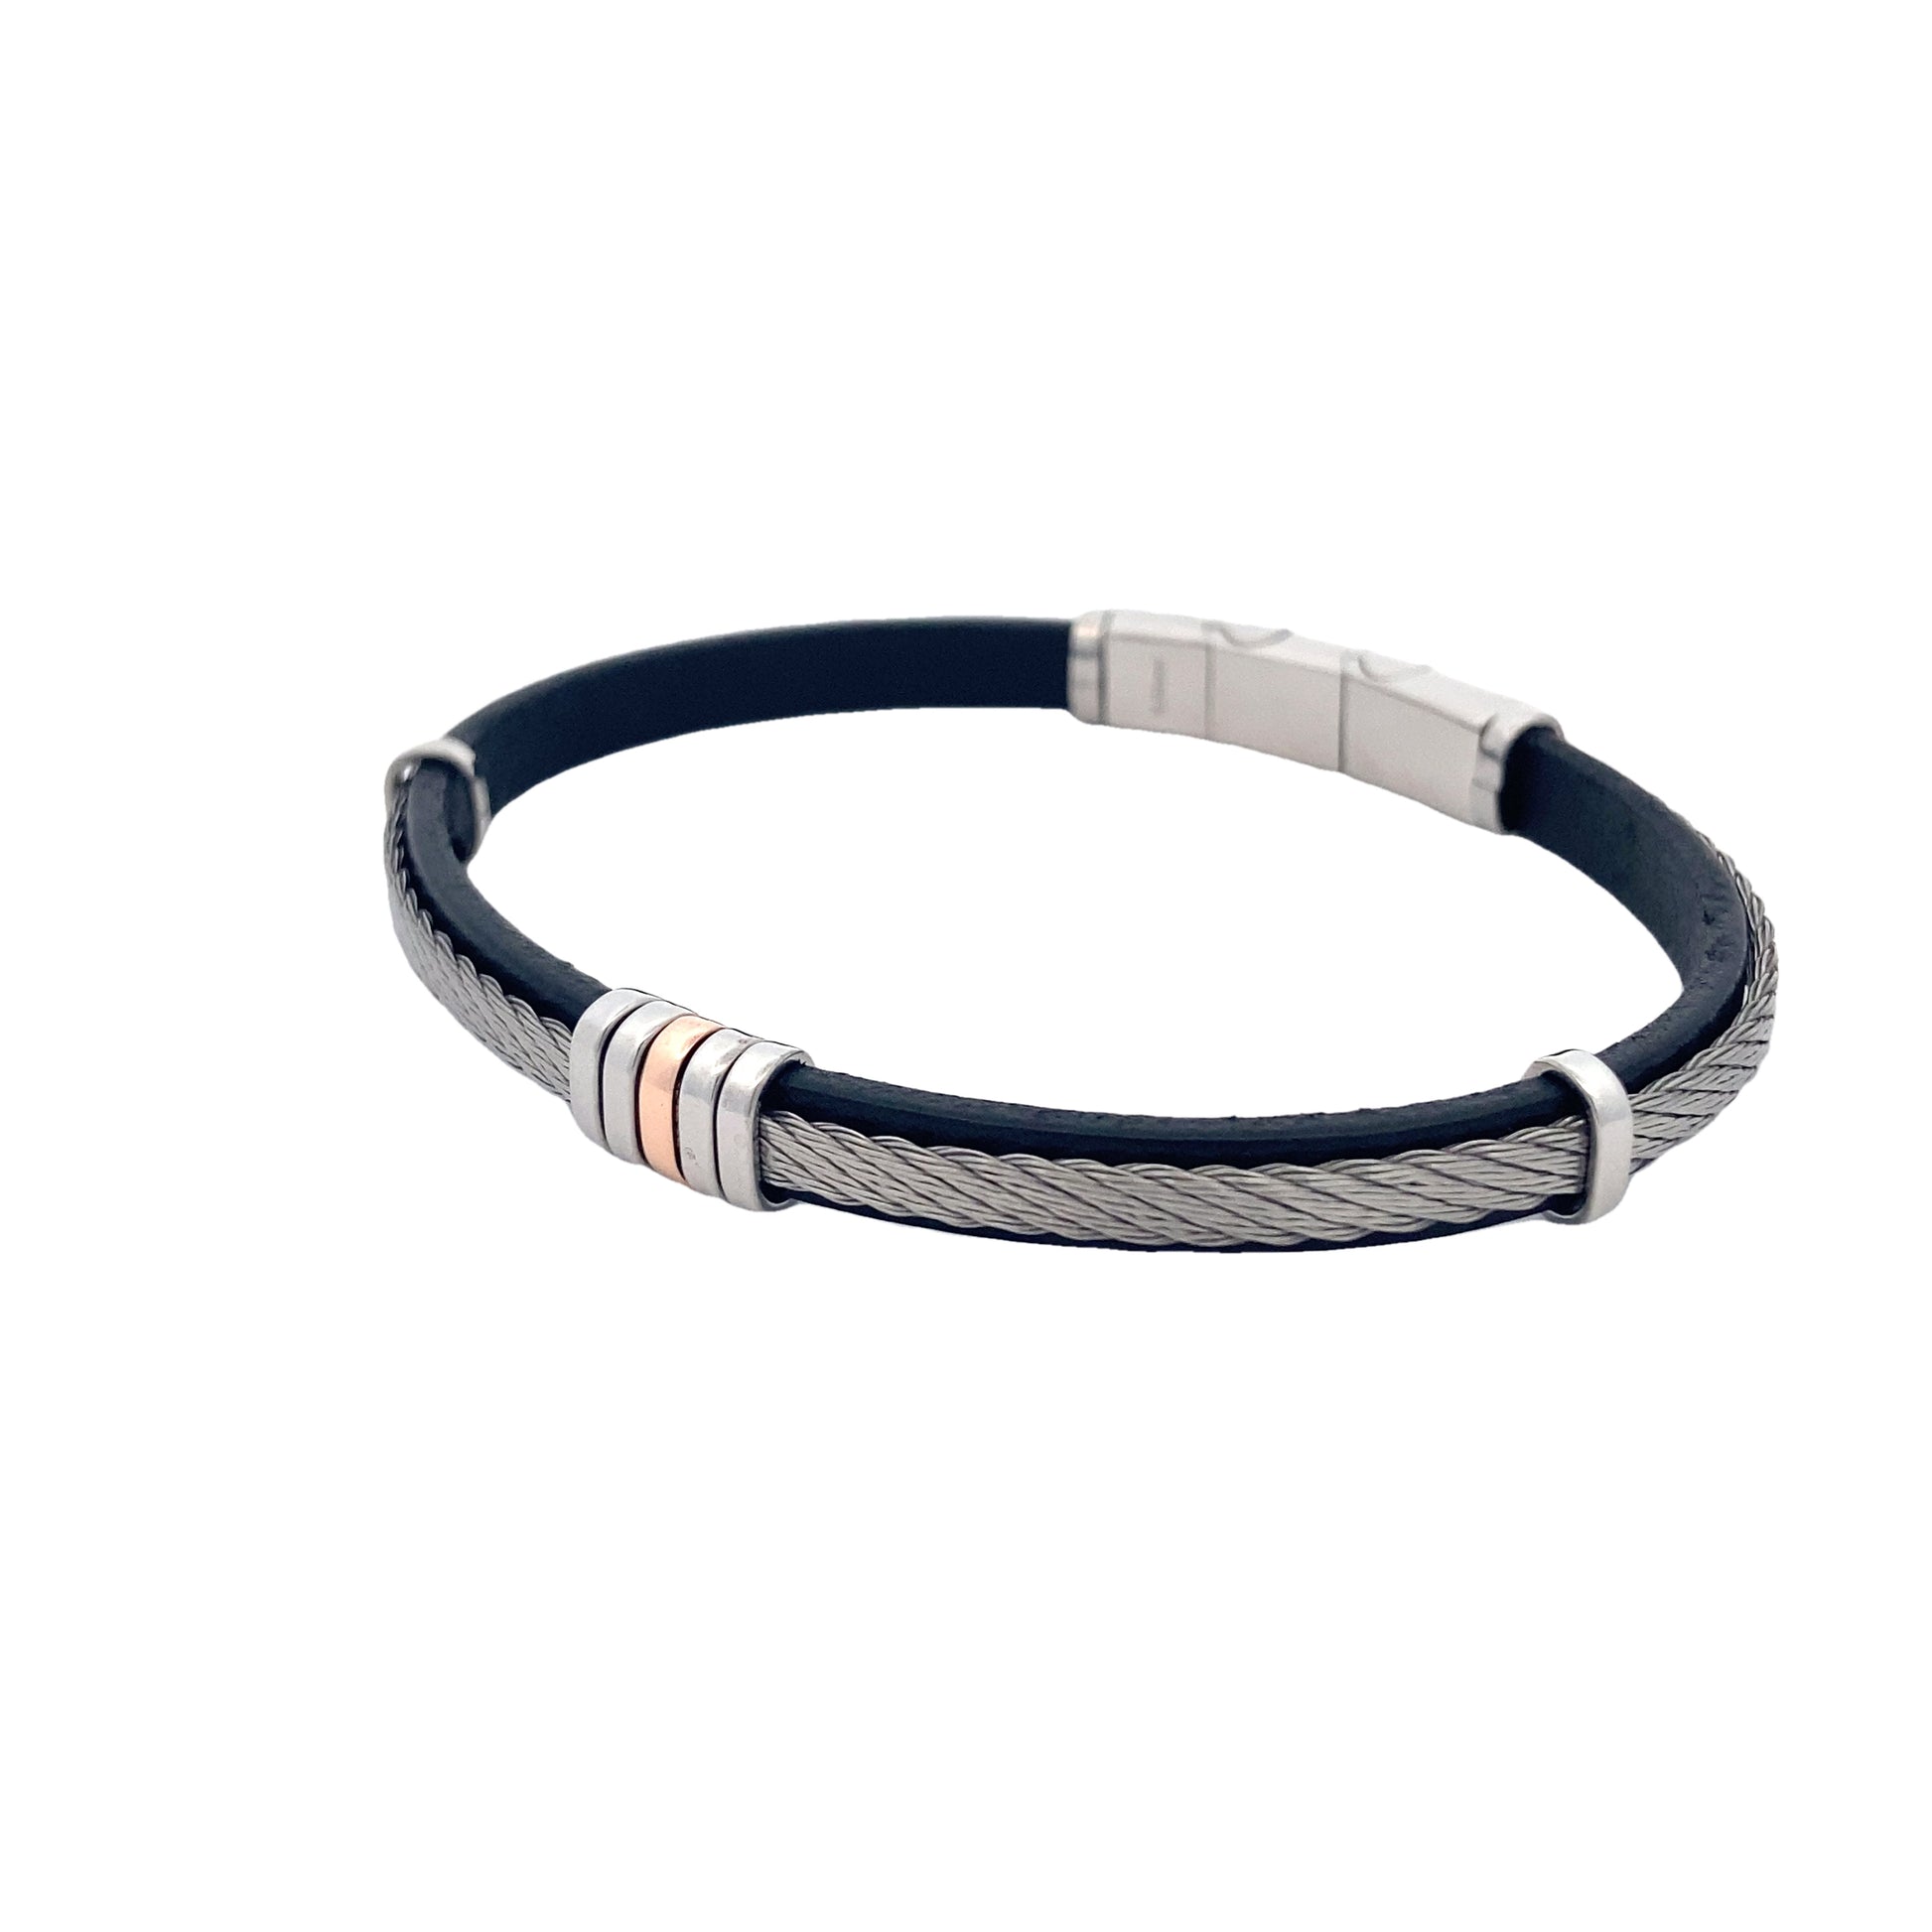 Hector by Marcello Pane Men Bracelet | Hector by Marcello Pane | Luby 